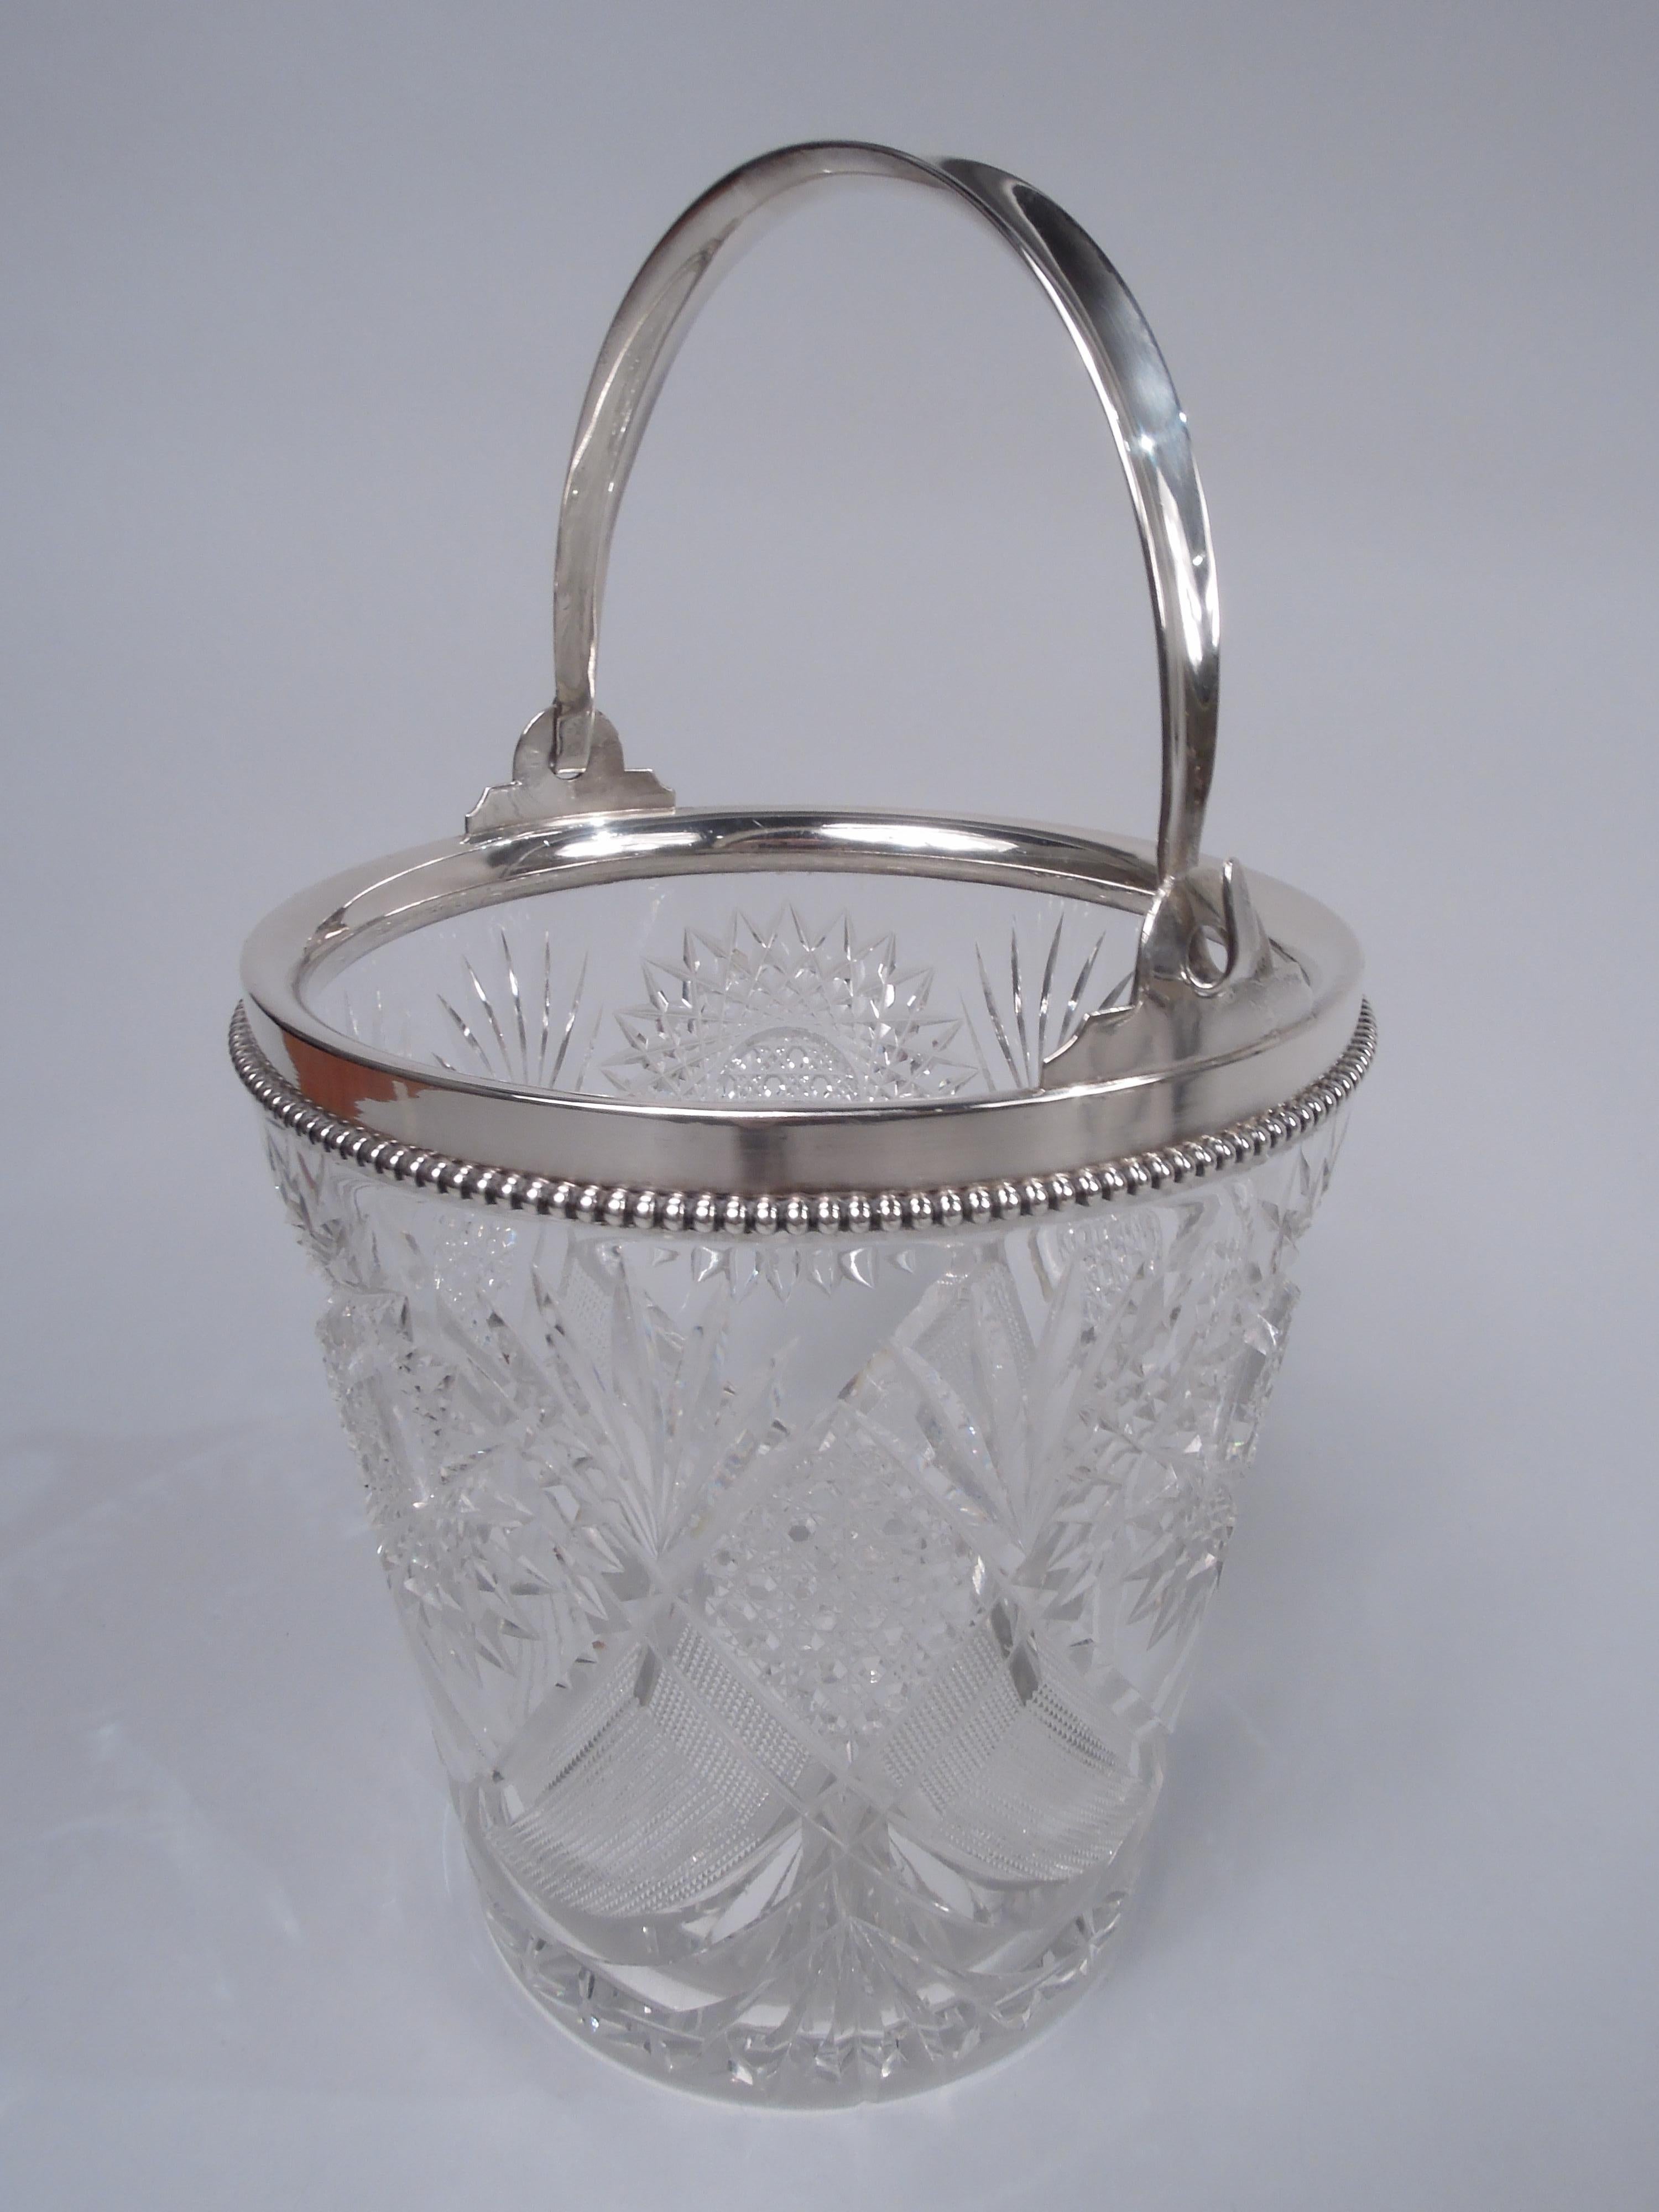 Victorian brilliant-cut glass ice bucket with sterling silver mounts. Made by Wilcox (part of International) in Meriden, Conn., ca 1900. Tapering sides with diaper and star ornament. Mouth has sterling silver collar with beaded rim and c-scroll